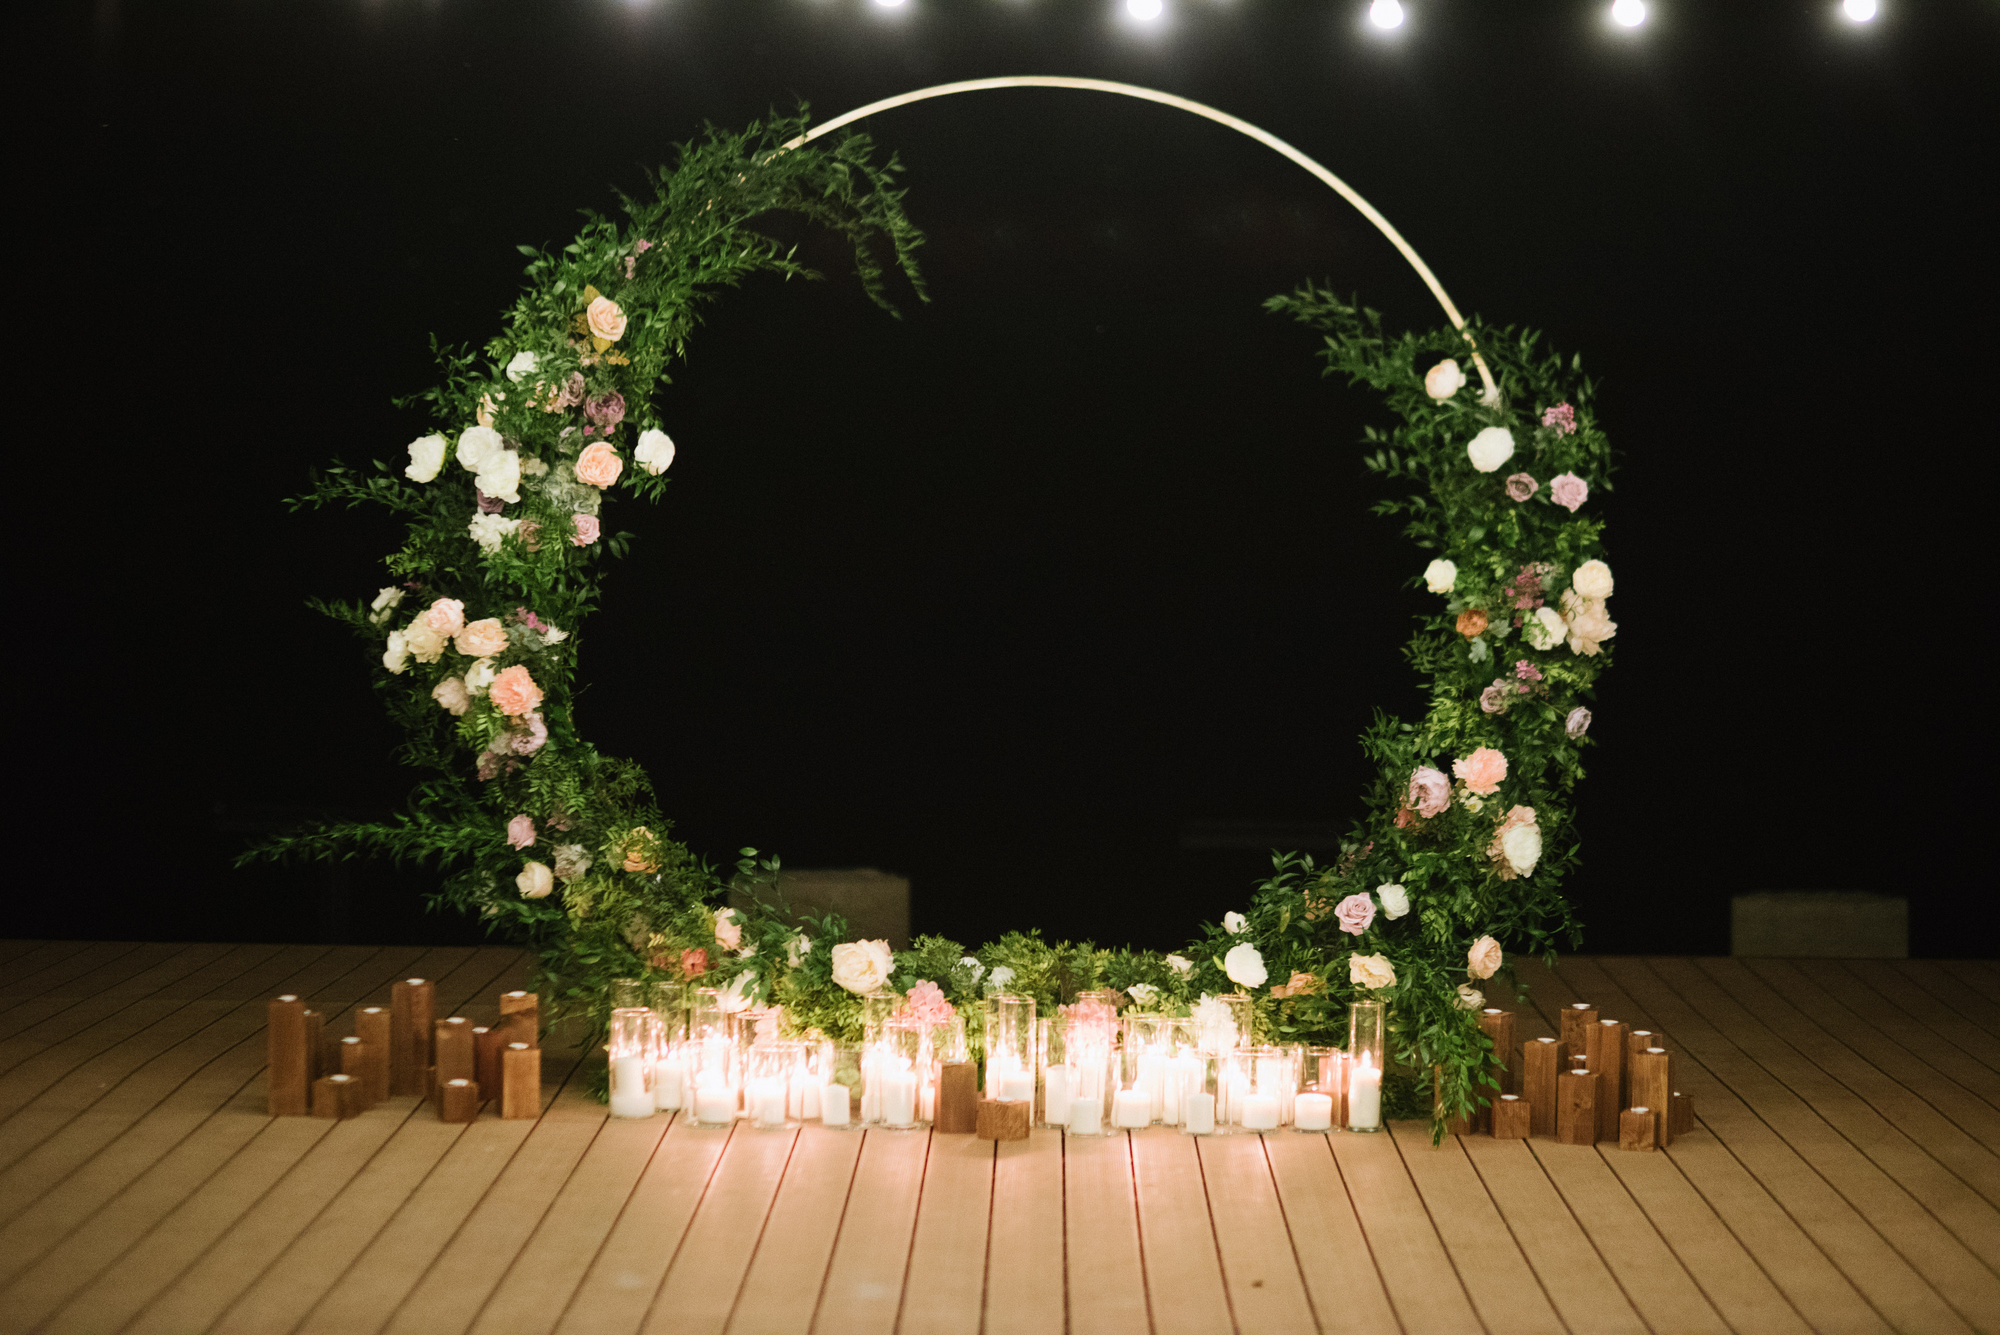 outdoor wedding ceremony.decoration and decoration of an outdoor wedding ceremony